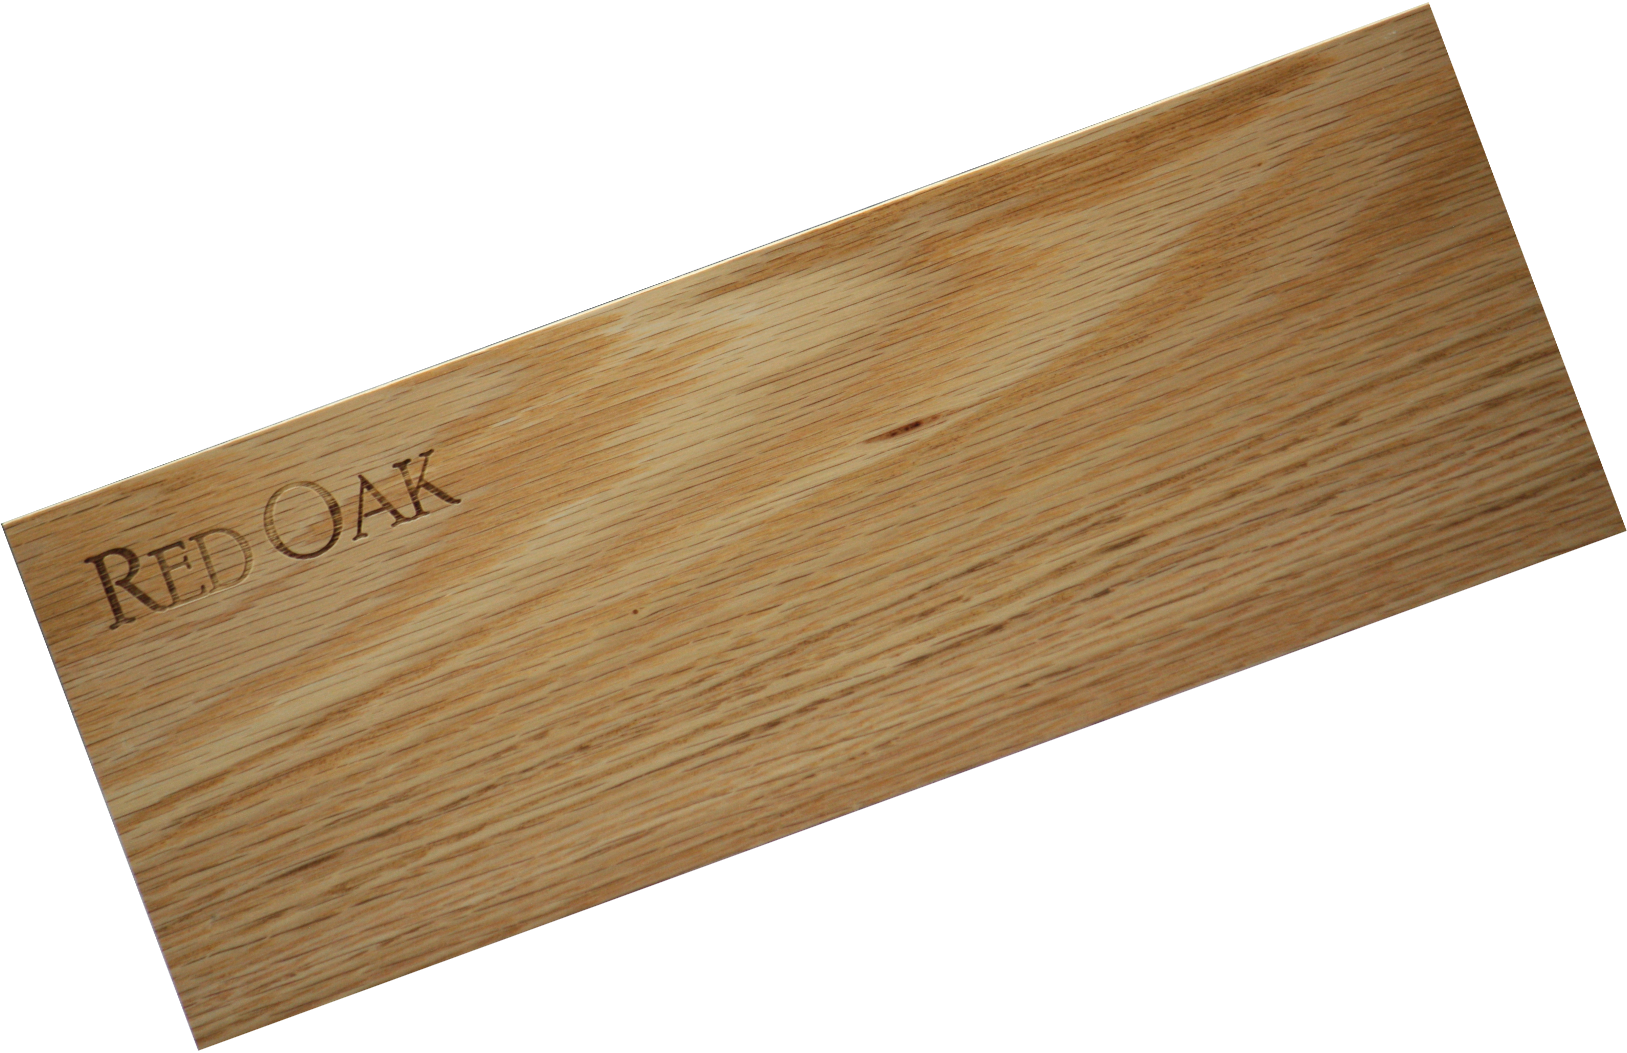 Wood Strip (Red Oak / Hickory) 4" x 19" x  (1/16", 3/32", 1/8", 3/16" or 1/4") 